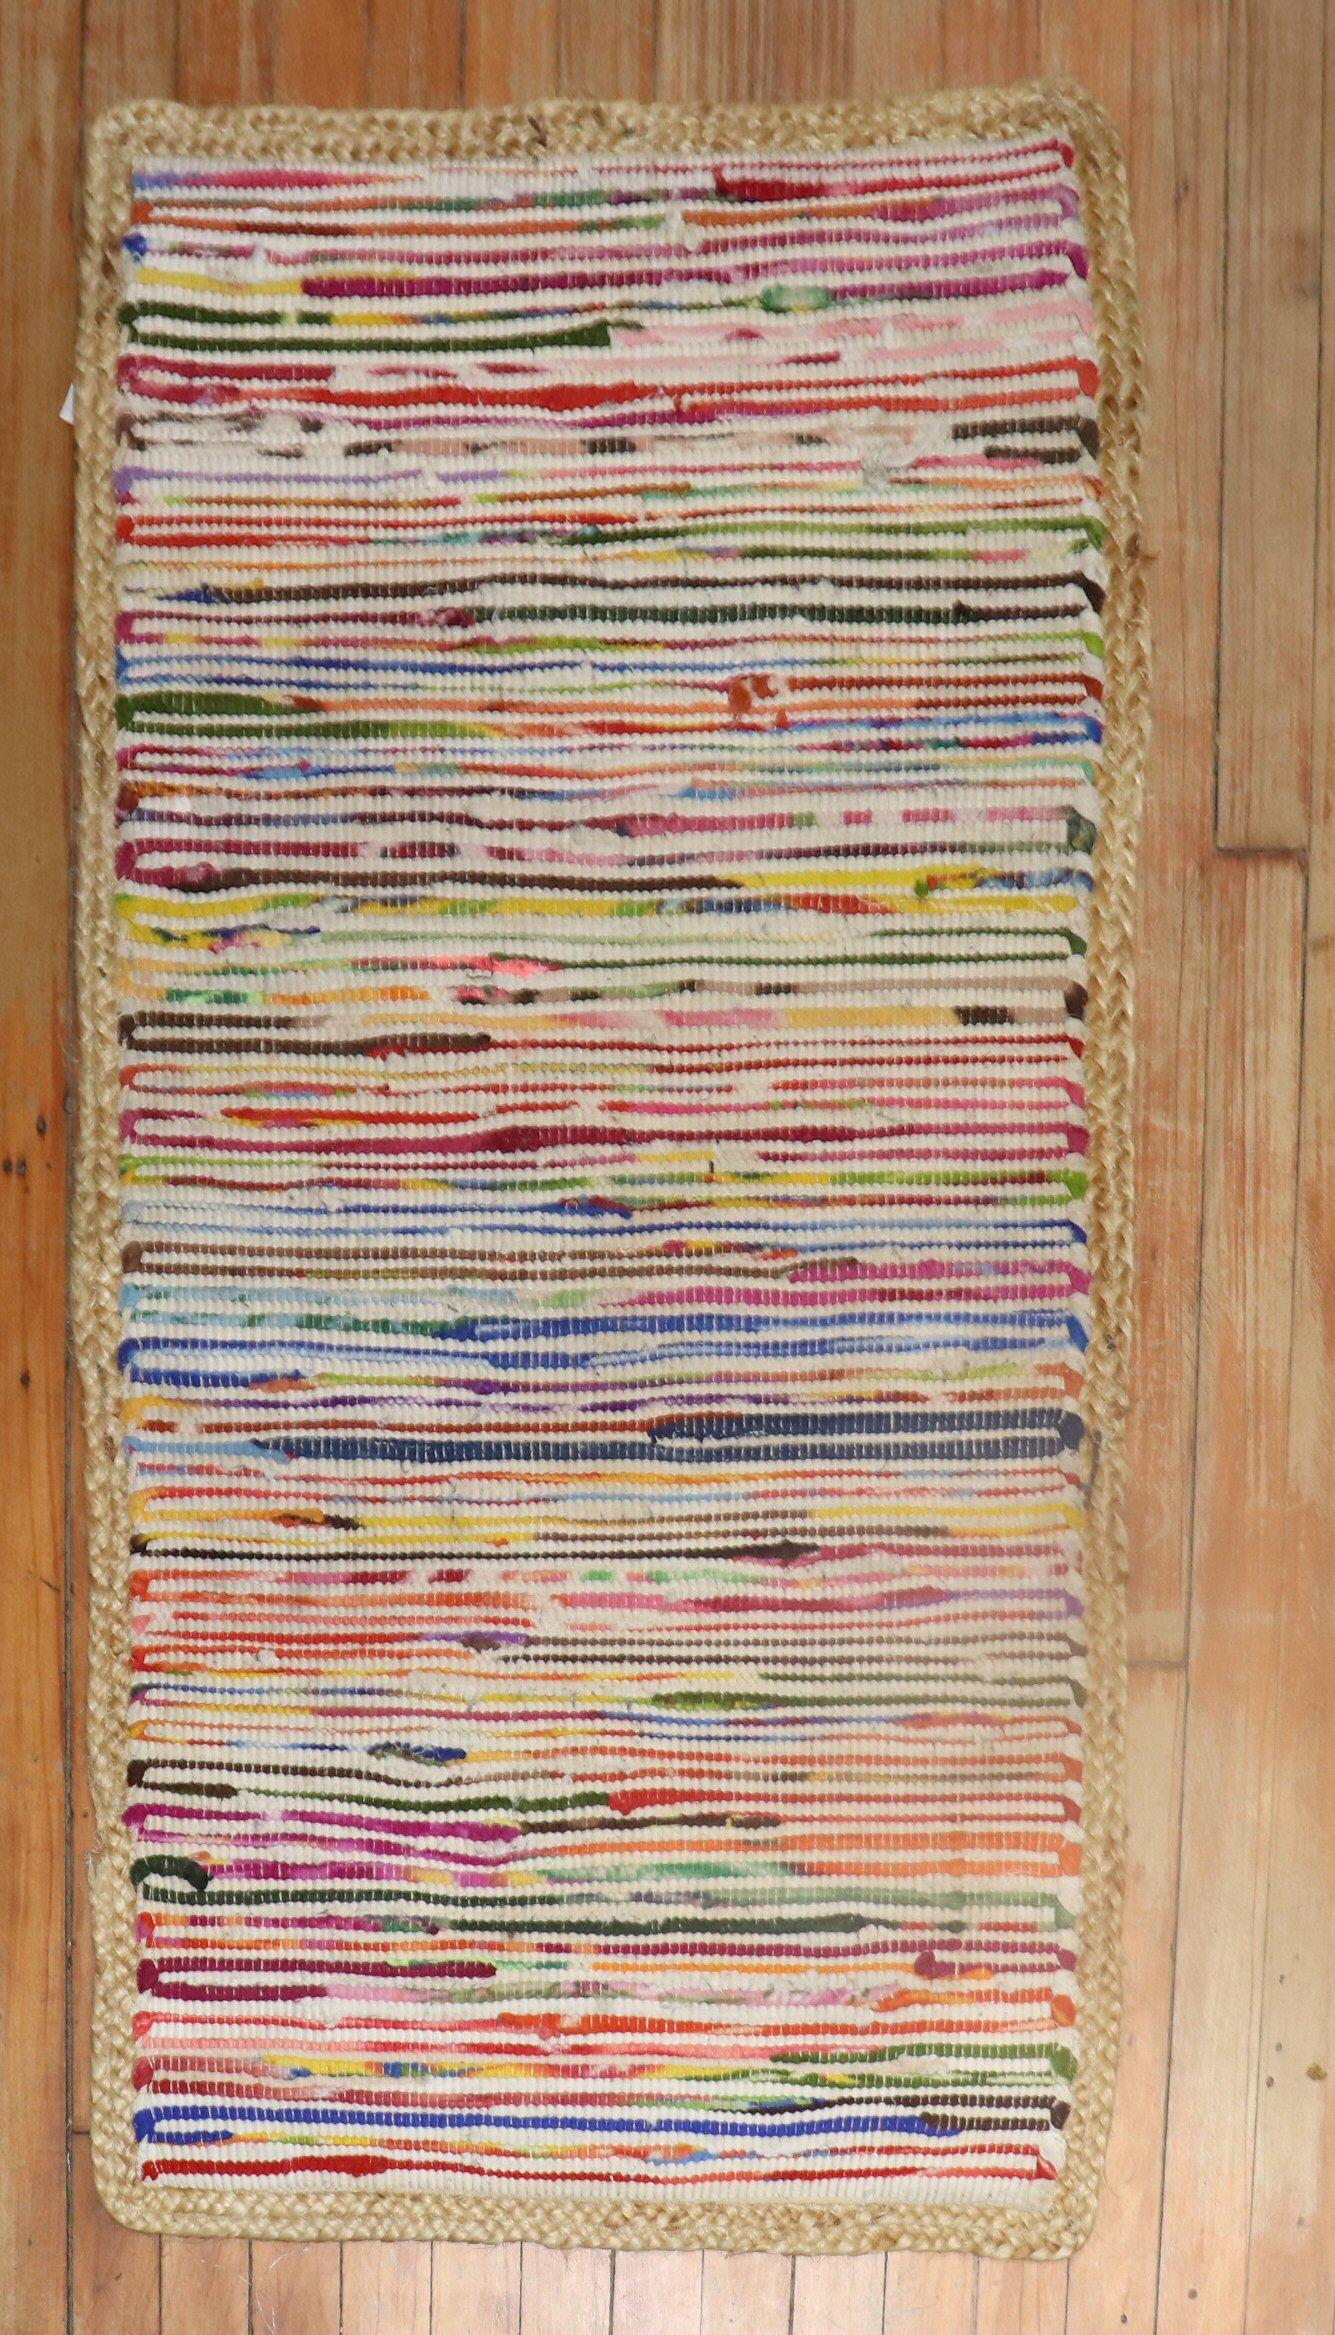 a mini-size American Rag rug from the late20th century

Measures: 2'1'' x 3'9''.